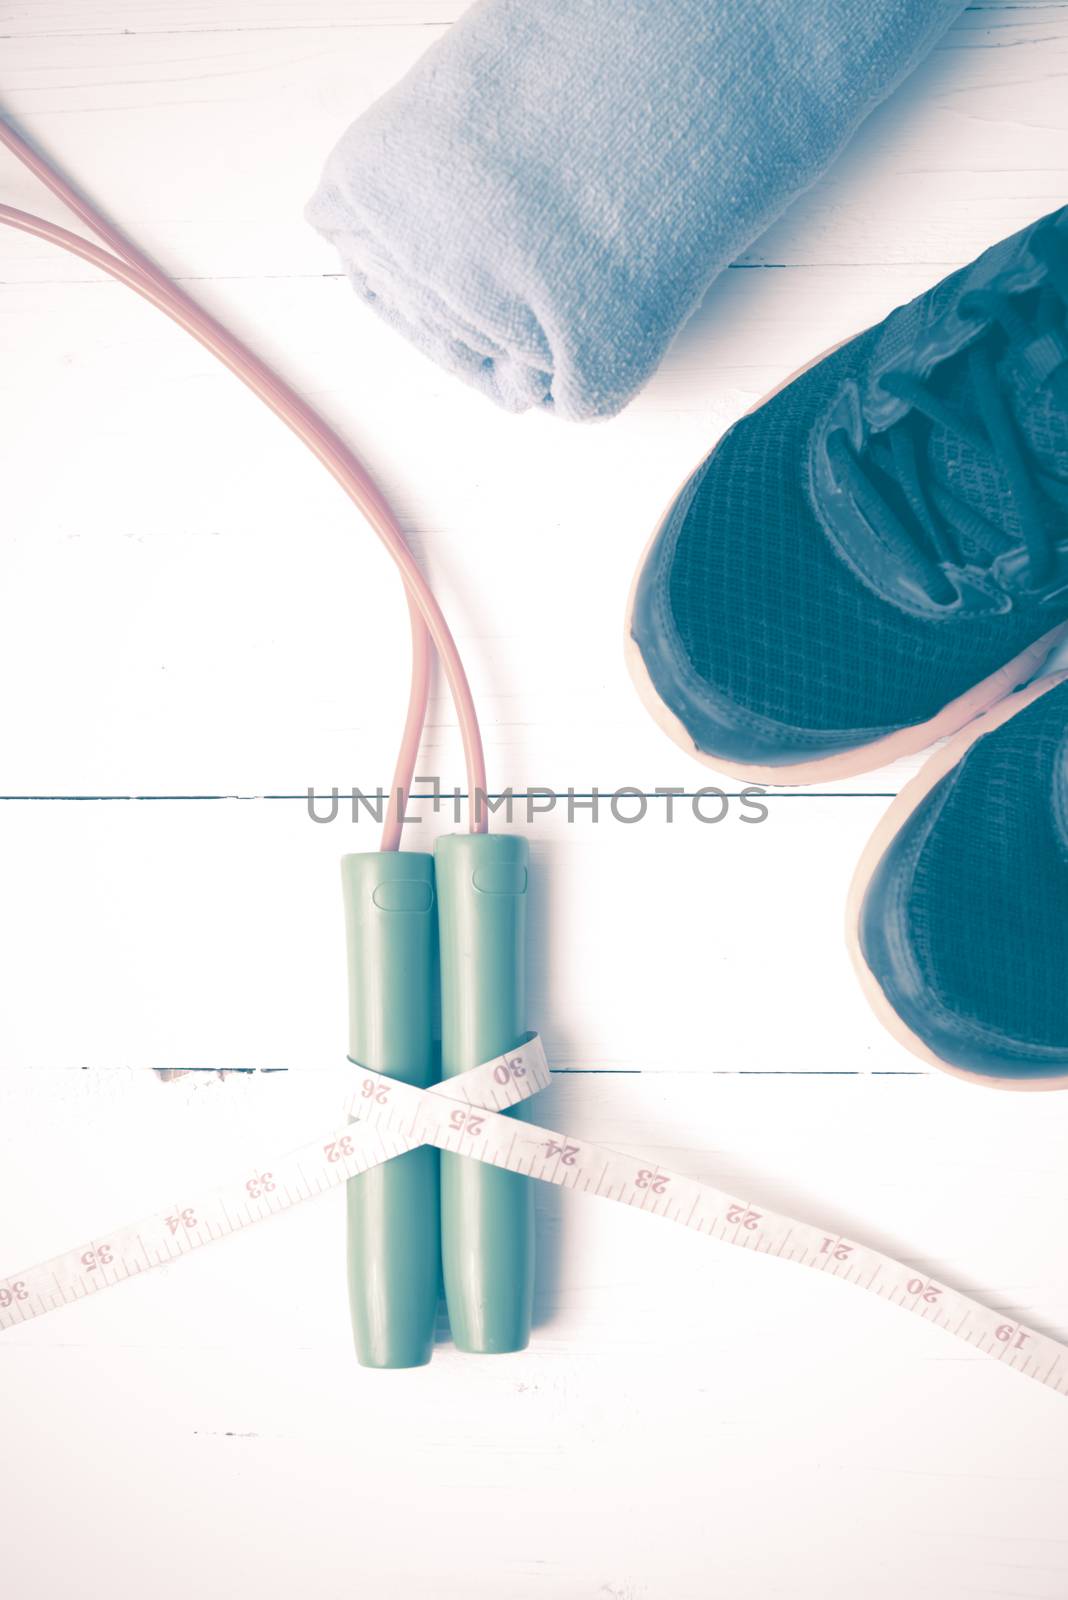 fitness equipment : running shoes,towel,jumping rope and measuring tape on white wood table vintage style